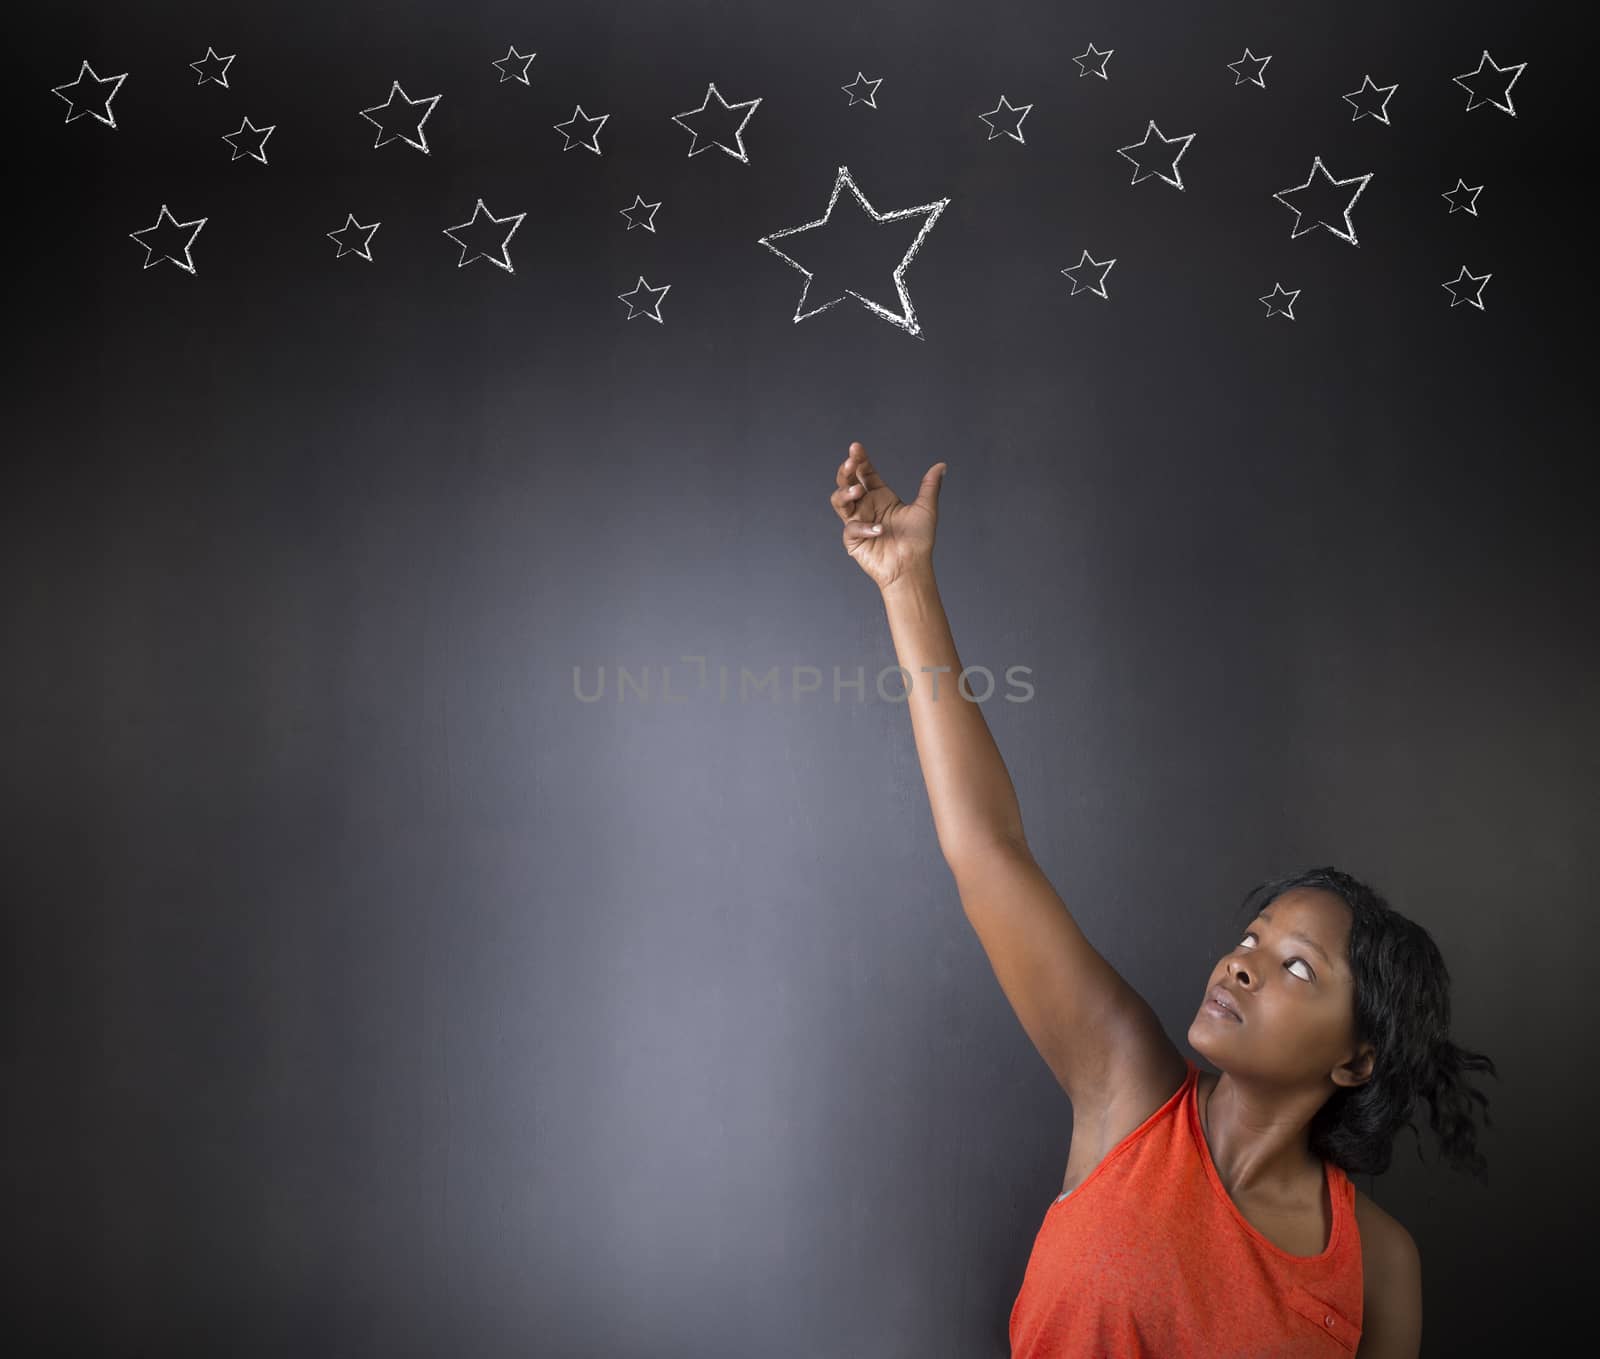 South African or African American woman teacher or student reaching for the stars success against blackboard background